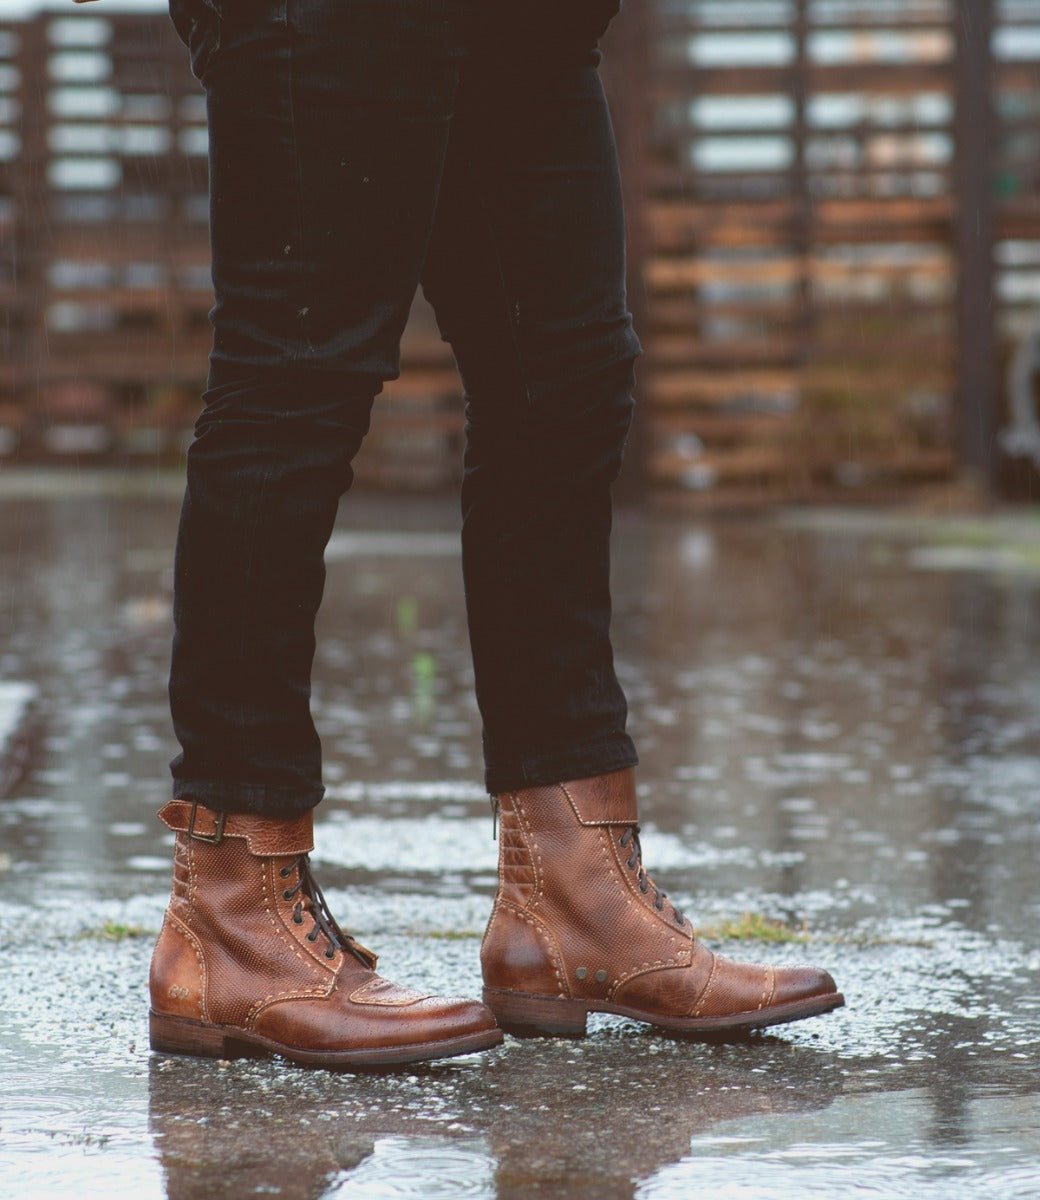 A person wearing Bed Stu's brown leather moto-inspired boots, "Walker," and black jeans standing on a wet surface with puddles, reflecting a cloudy sky.